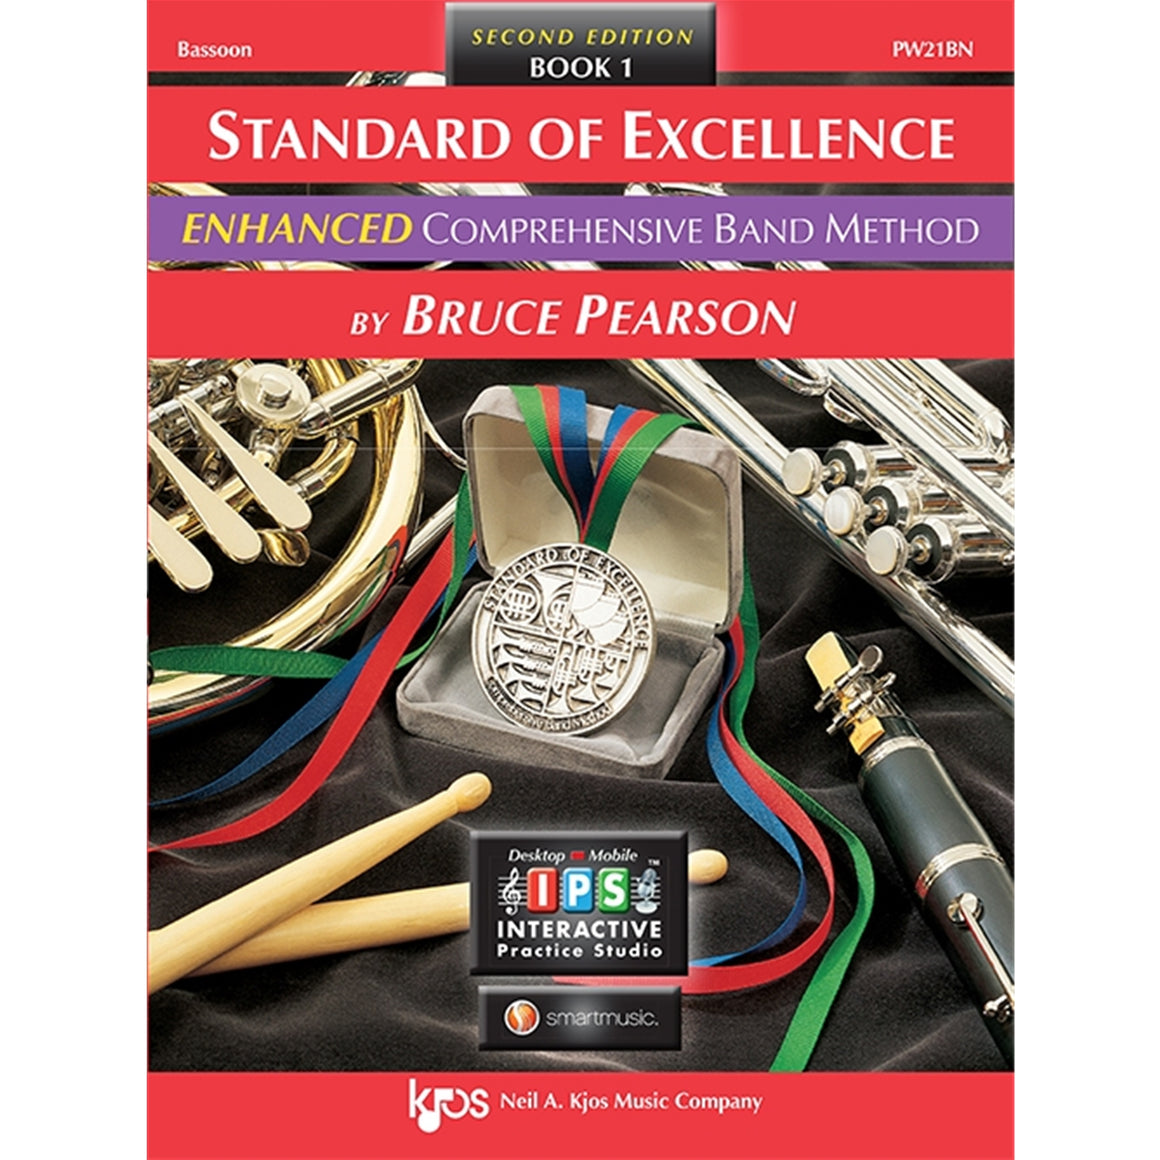 KJOS PW21BN Standard of Excellence Book 1 Bassoon